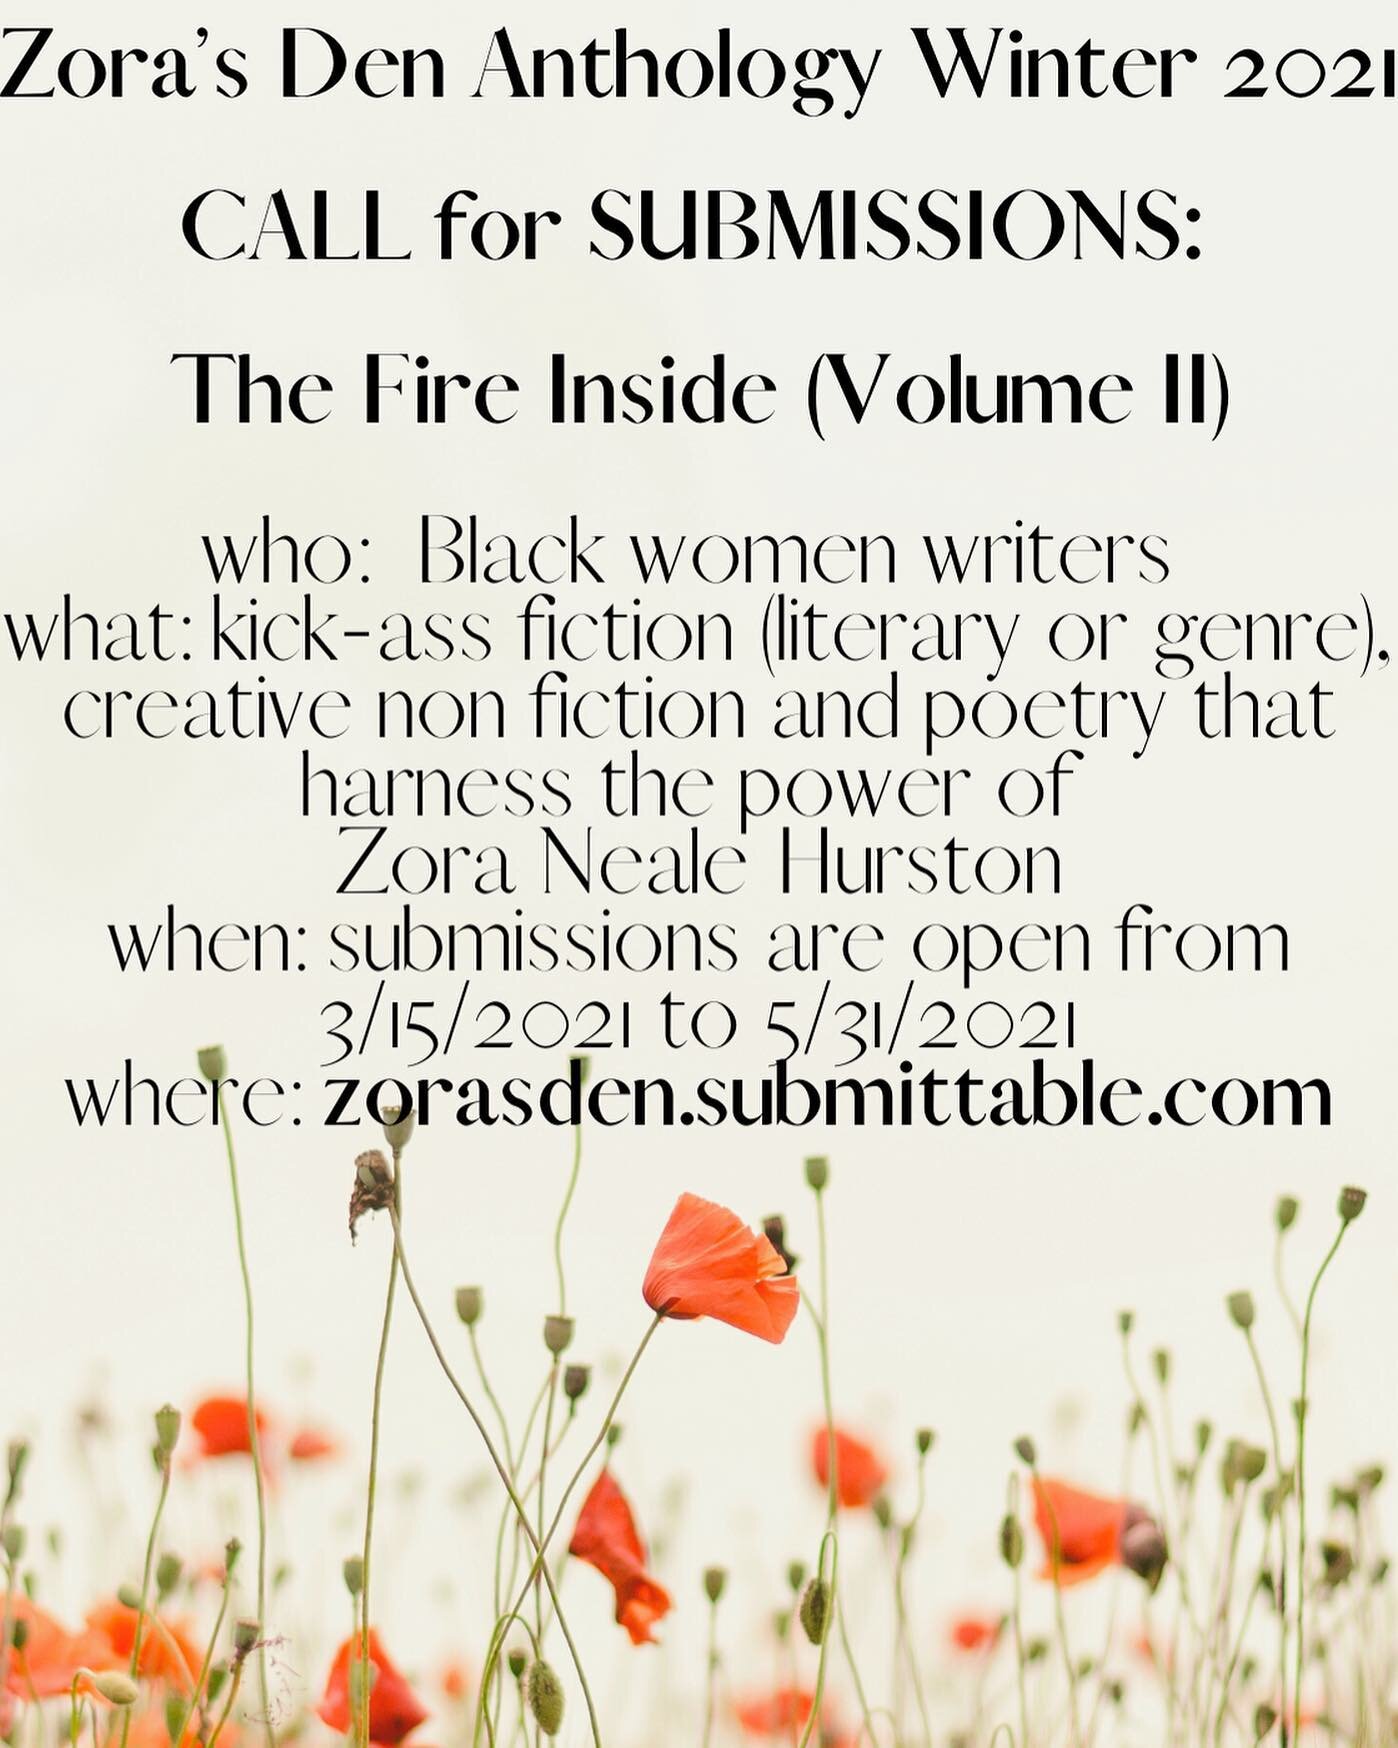 Today is the day, Sisters!
Submit!